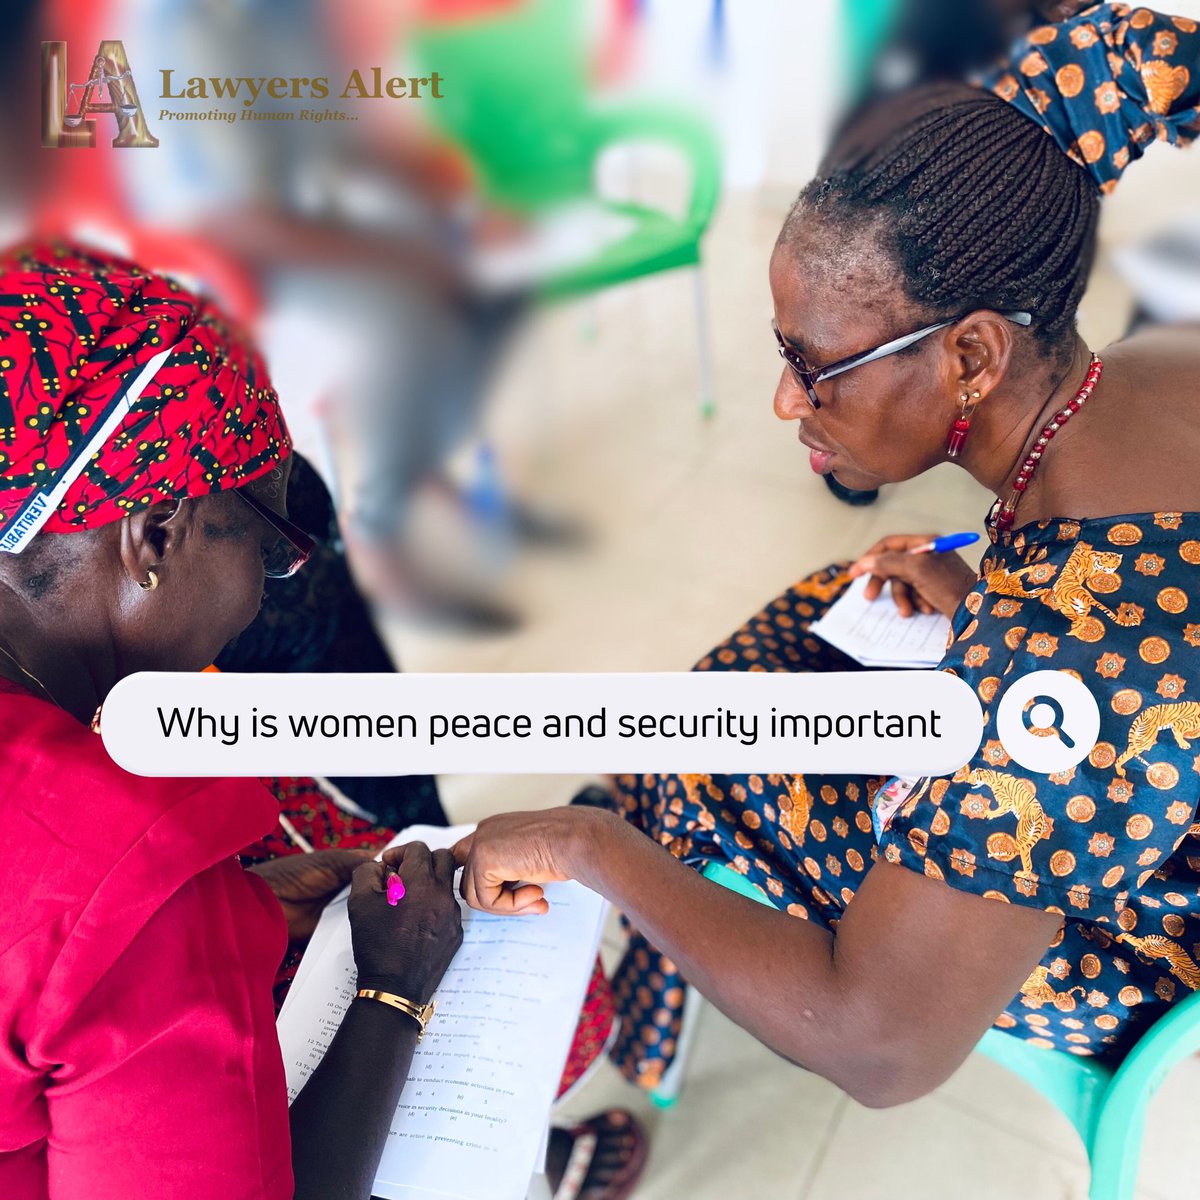 #womenpeaceandsecurity directly impacts positively on communities and peace processes by:
🤝Building trust within local communities.
👩‍🏭Breaking Stereotypes and Gender Norms.
🧑‍🧑‍🧒‍🧒Ensuring diverse needs of all members in society are considered and addressed.